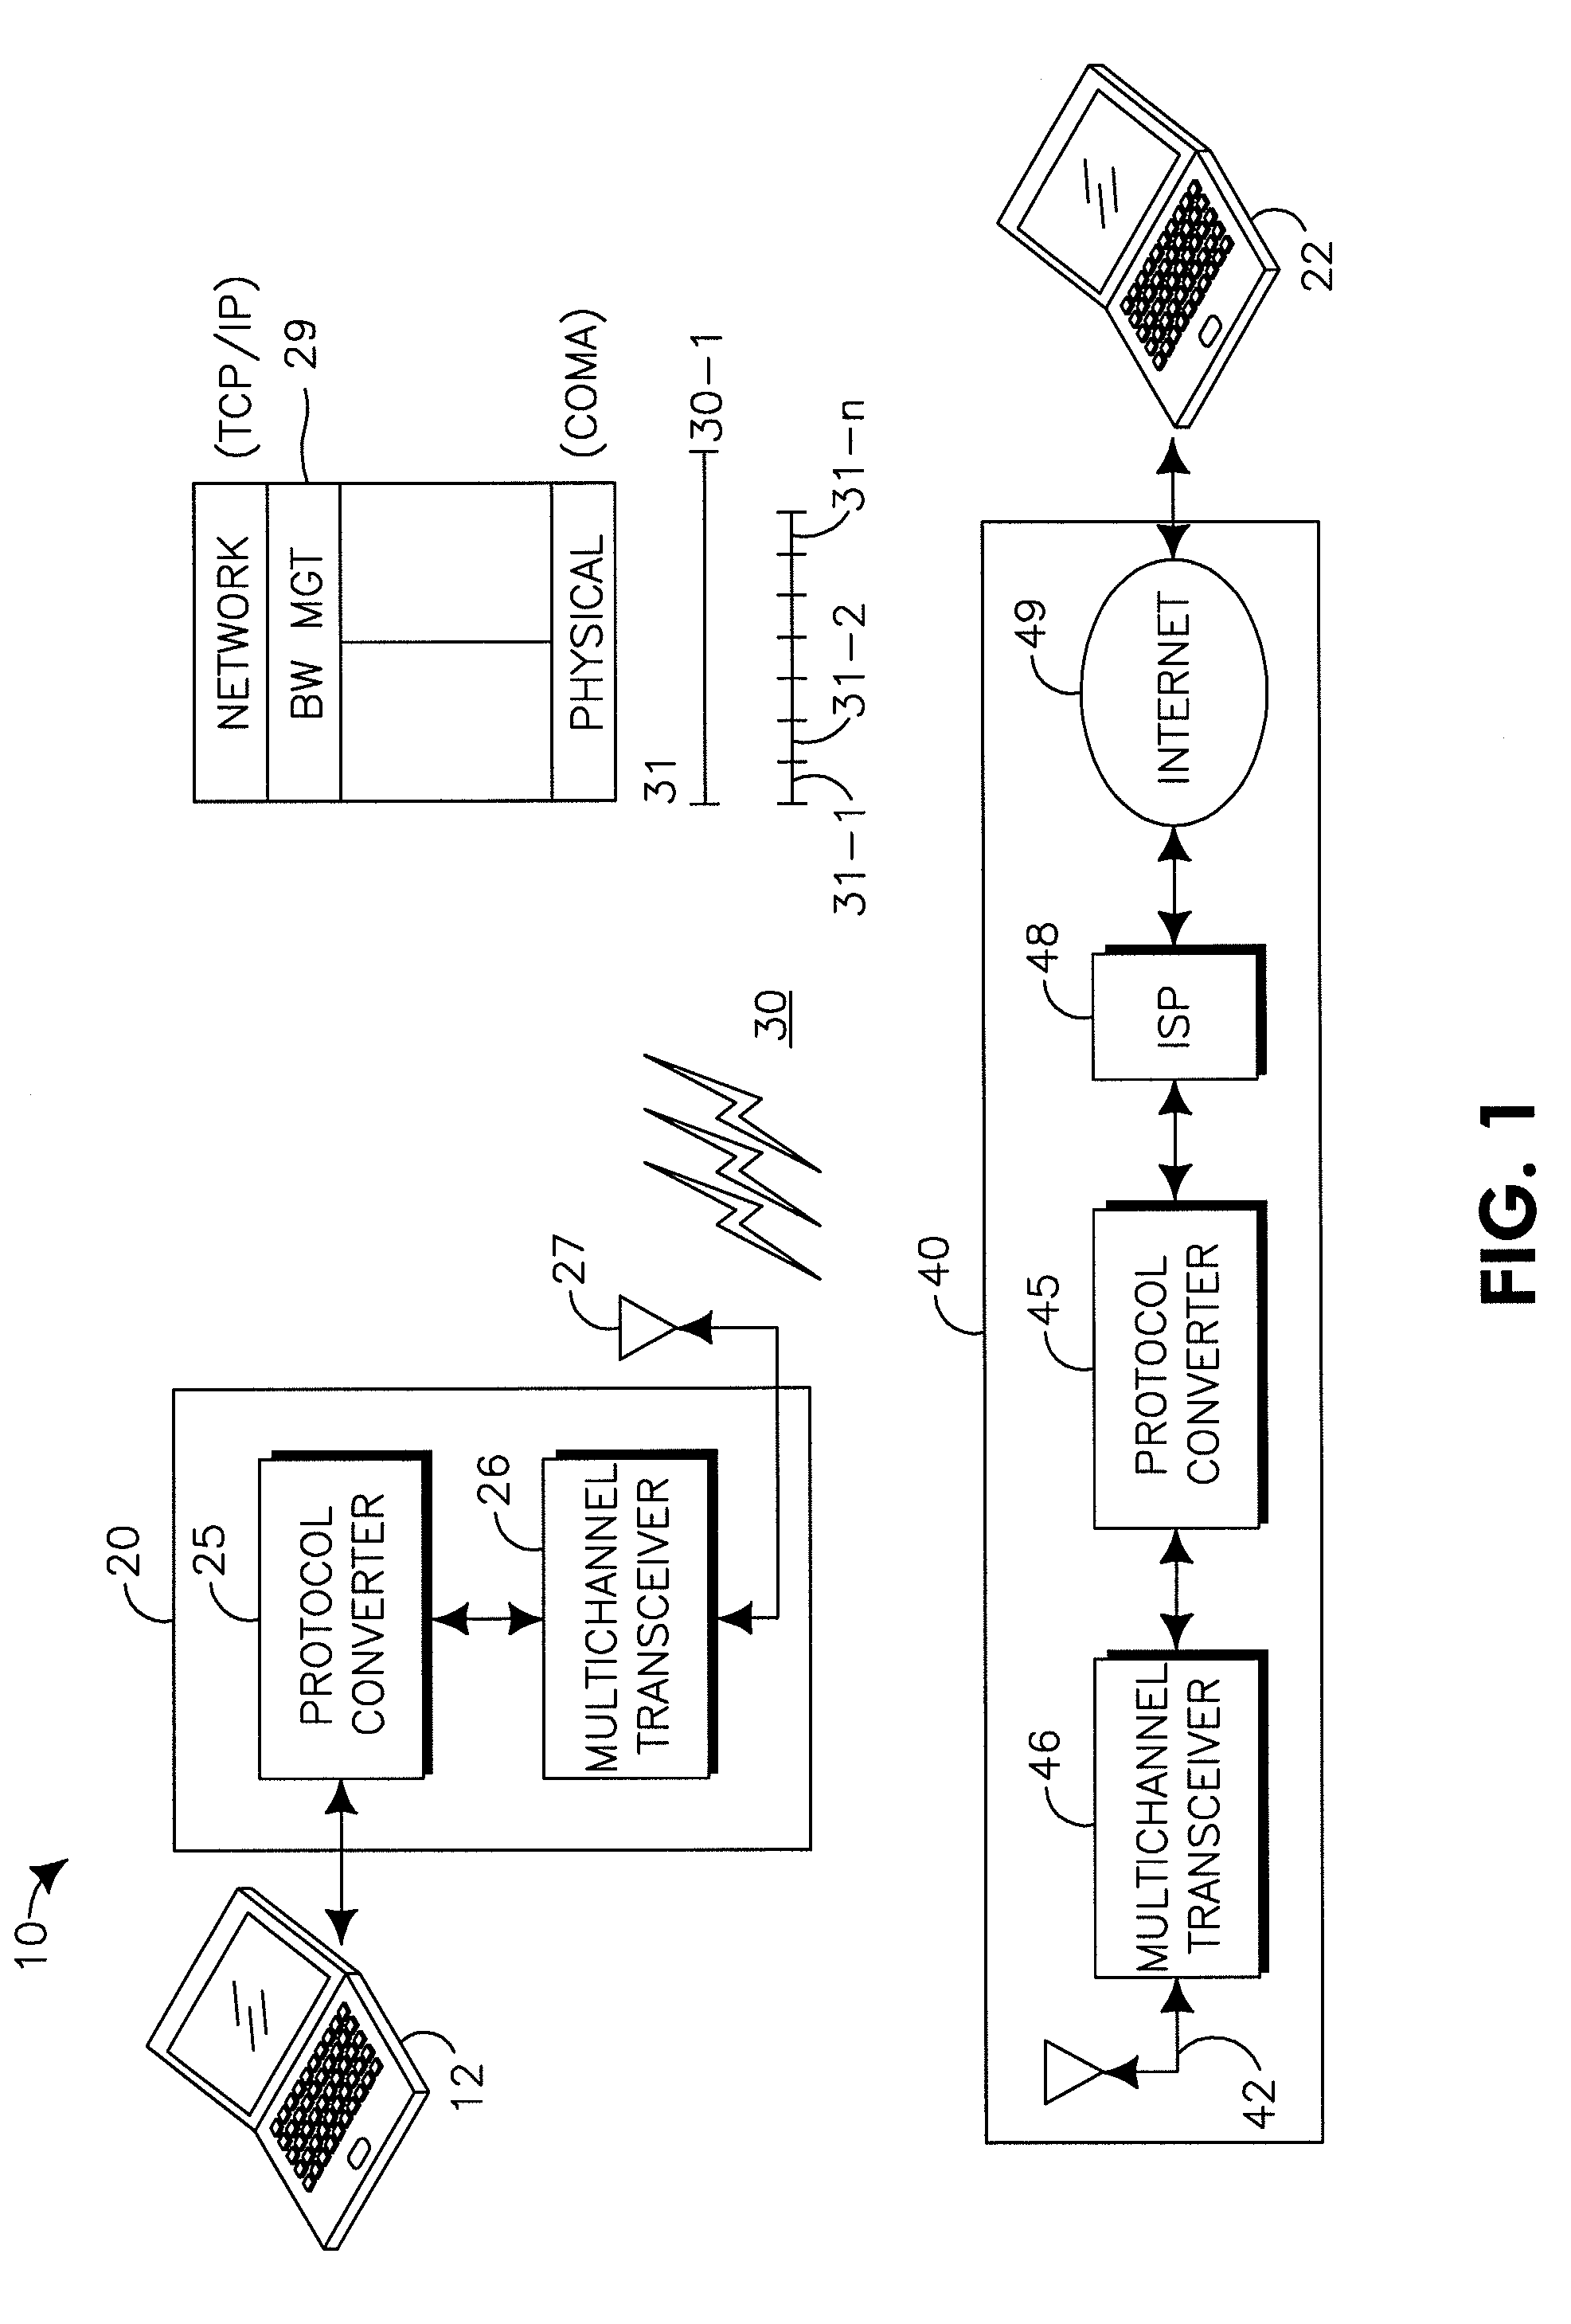 Variable rate forward error correction for enabling high performance communication